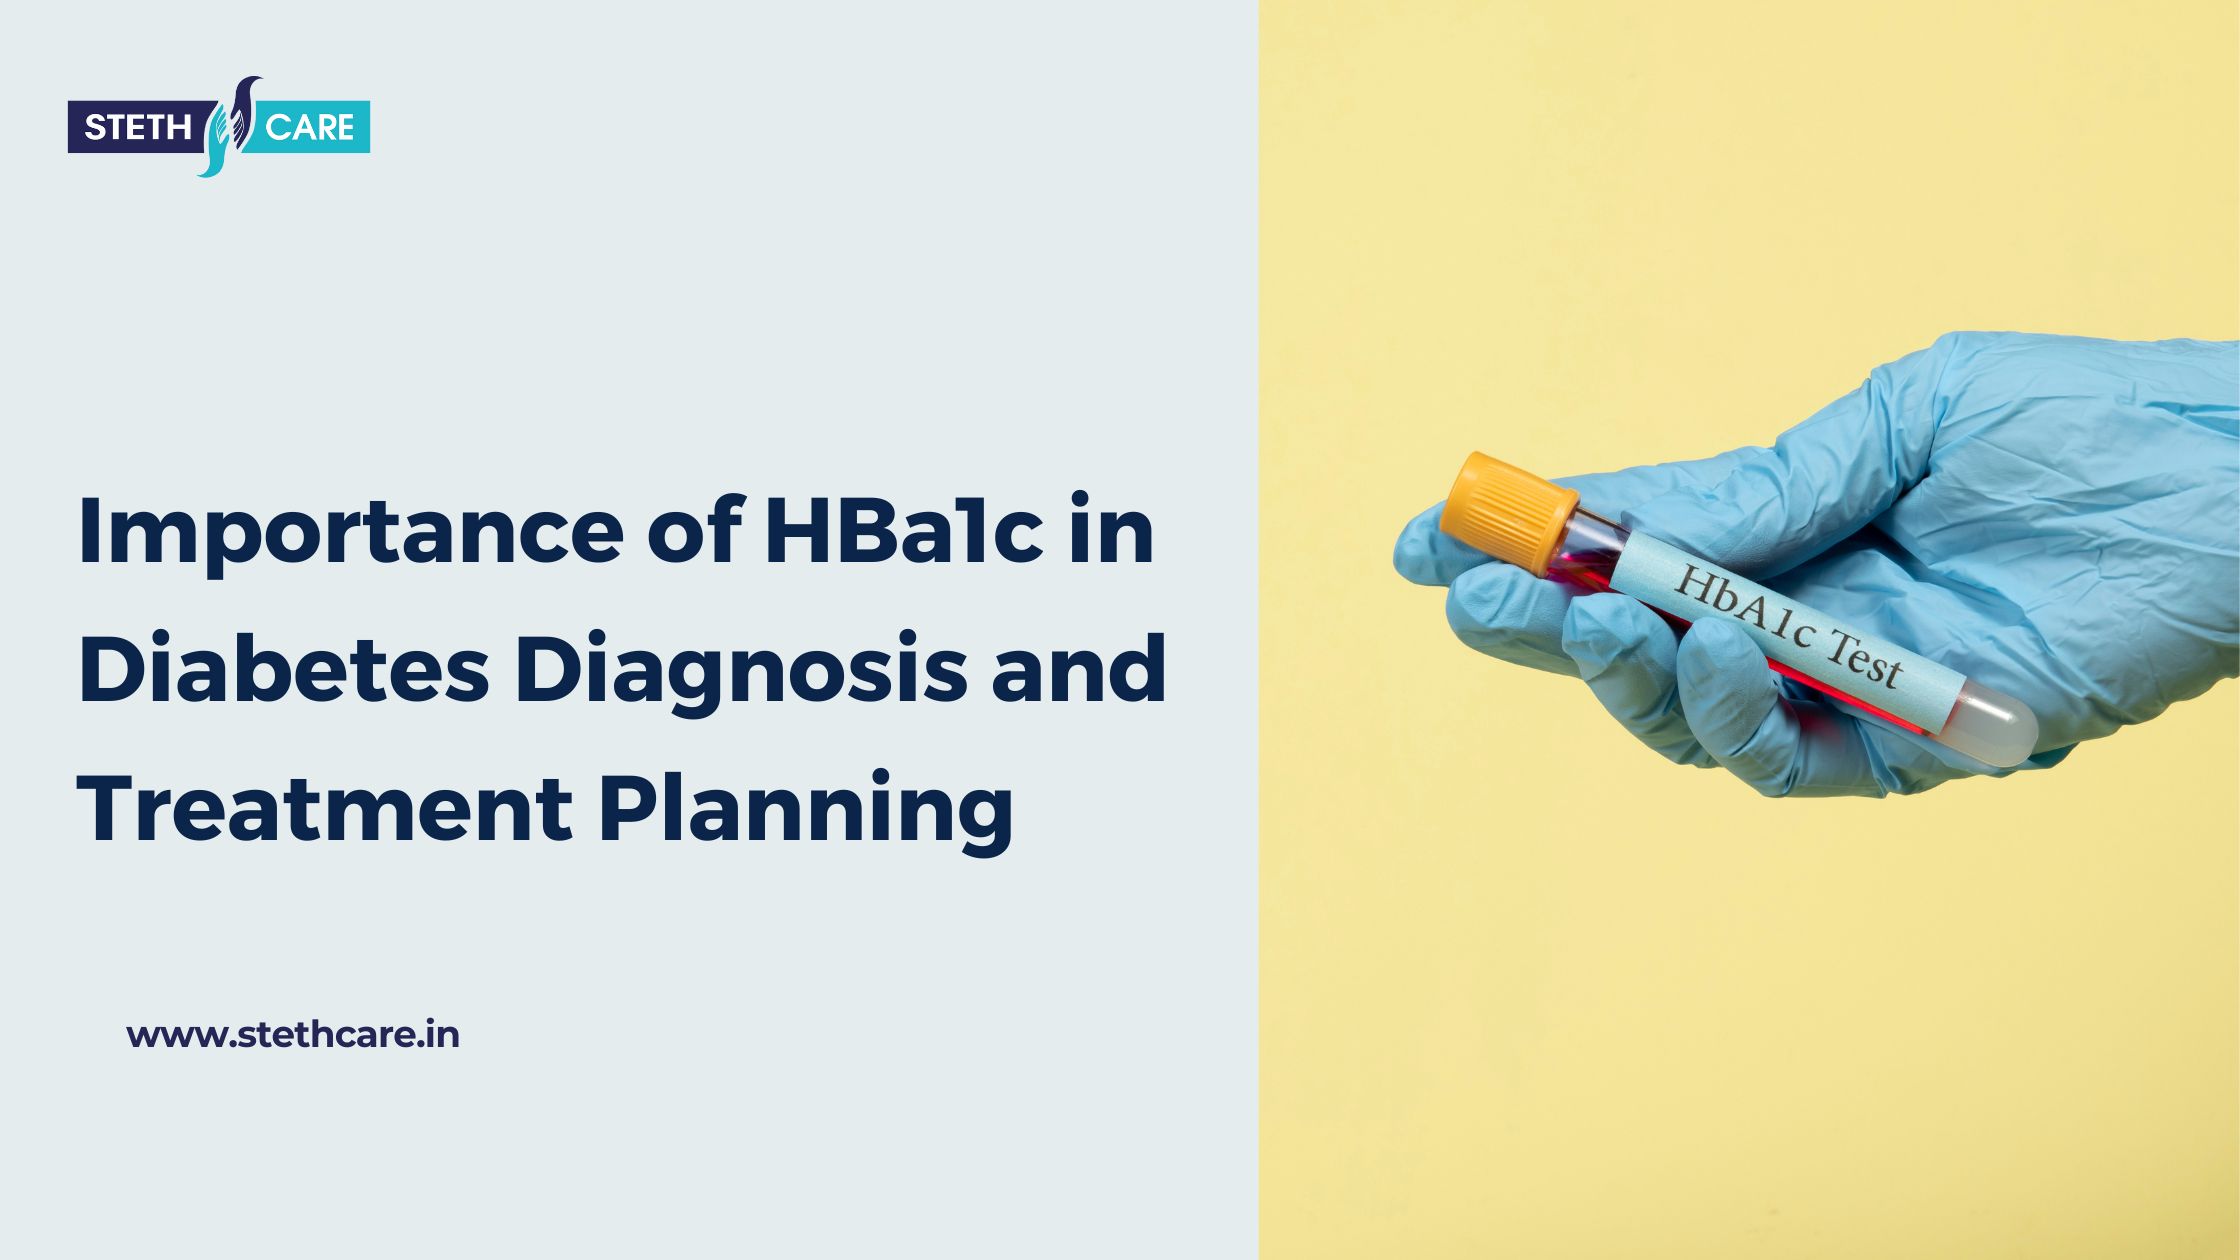 Importance of HBa1c in Diabetes Diagnosis and Treatment Planning